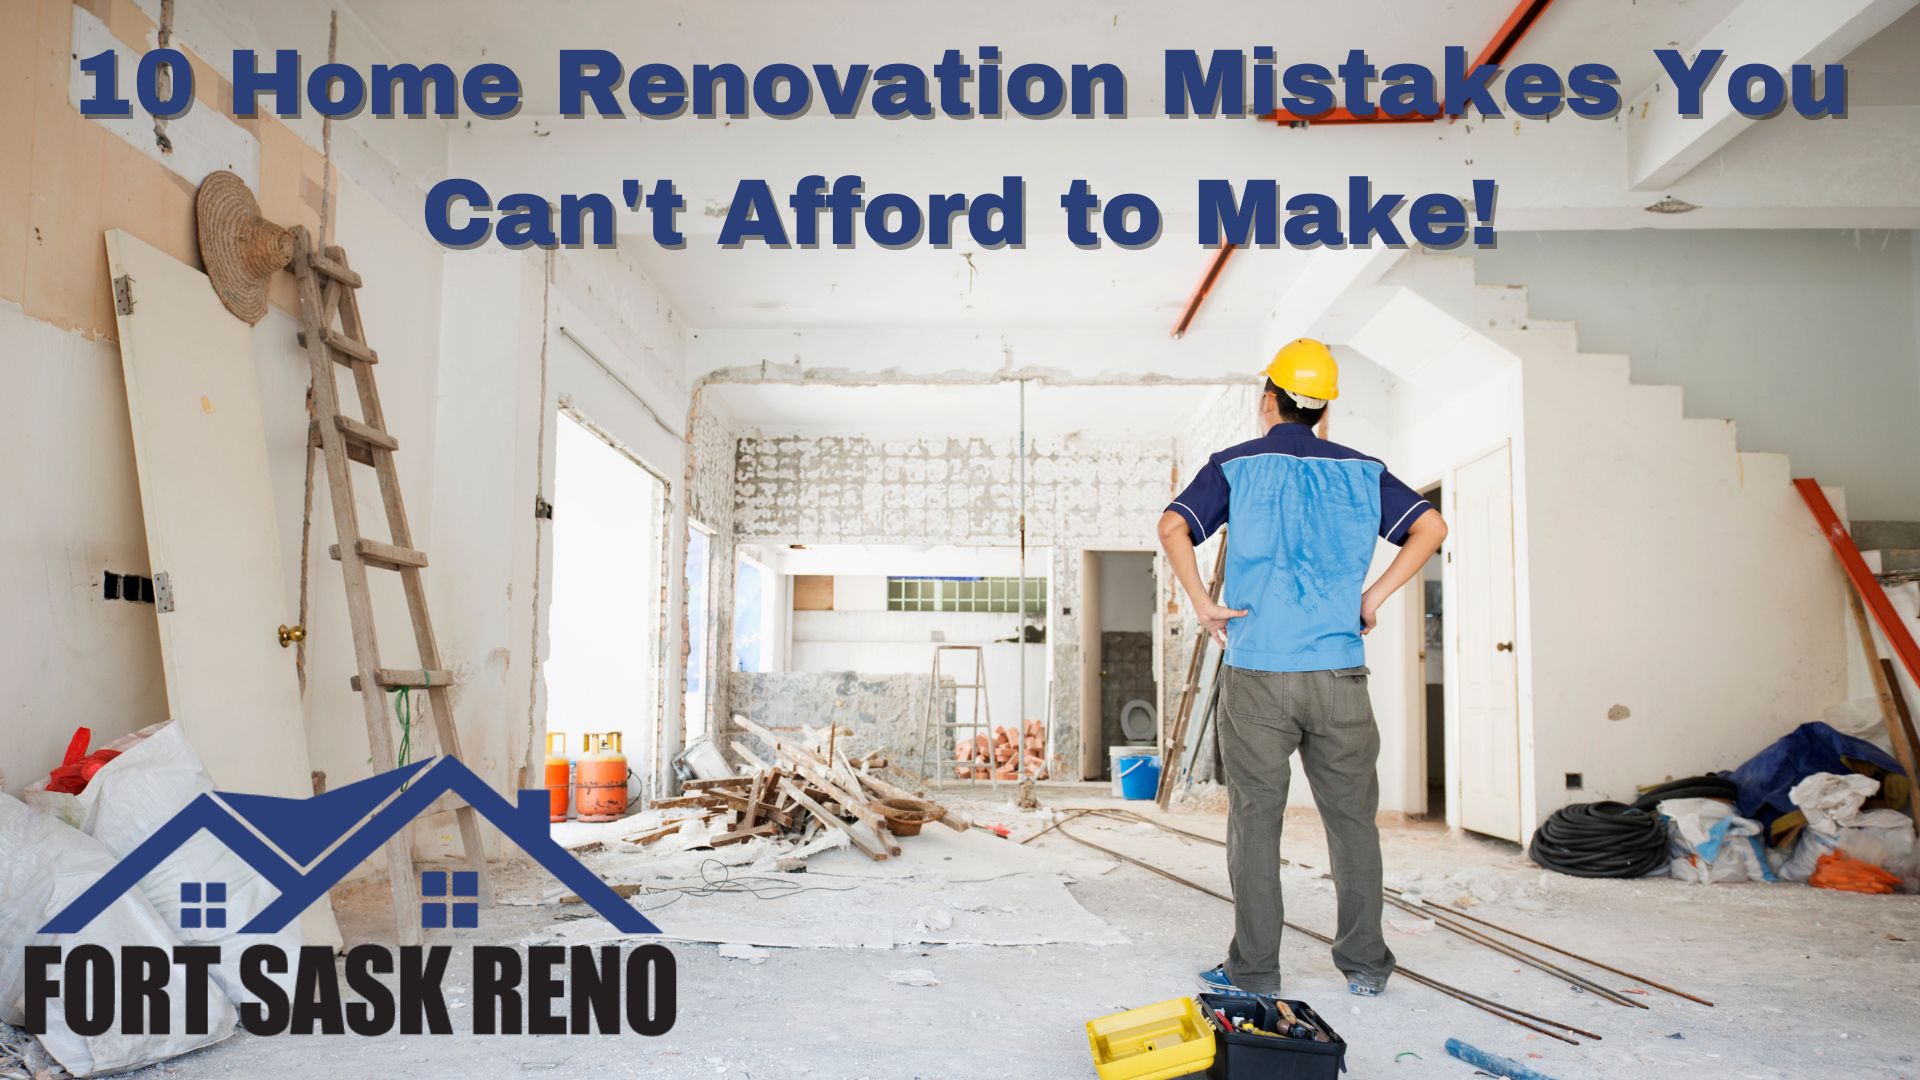 10 Home Renovation Mistakes to Avoid